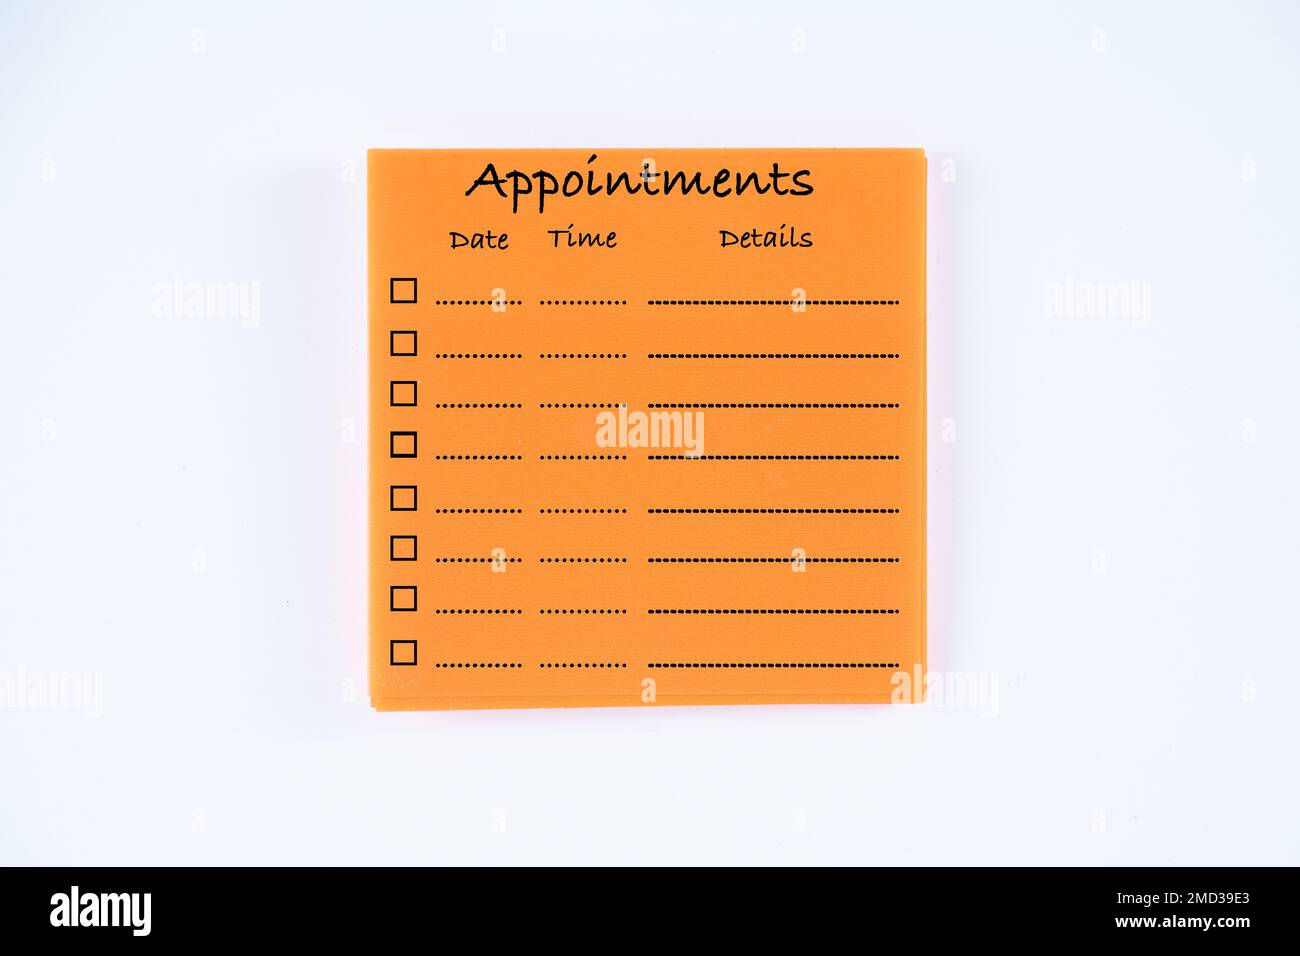 Appoointments organiser sticky note pad template mock up illustration in orange isolated on a white background Stock Photo